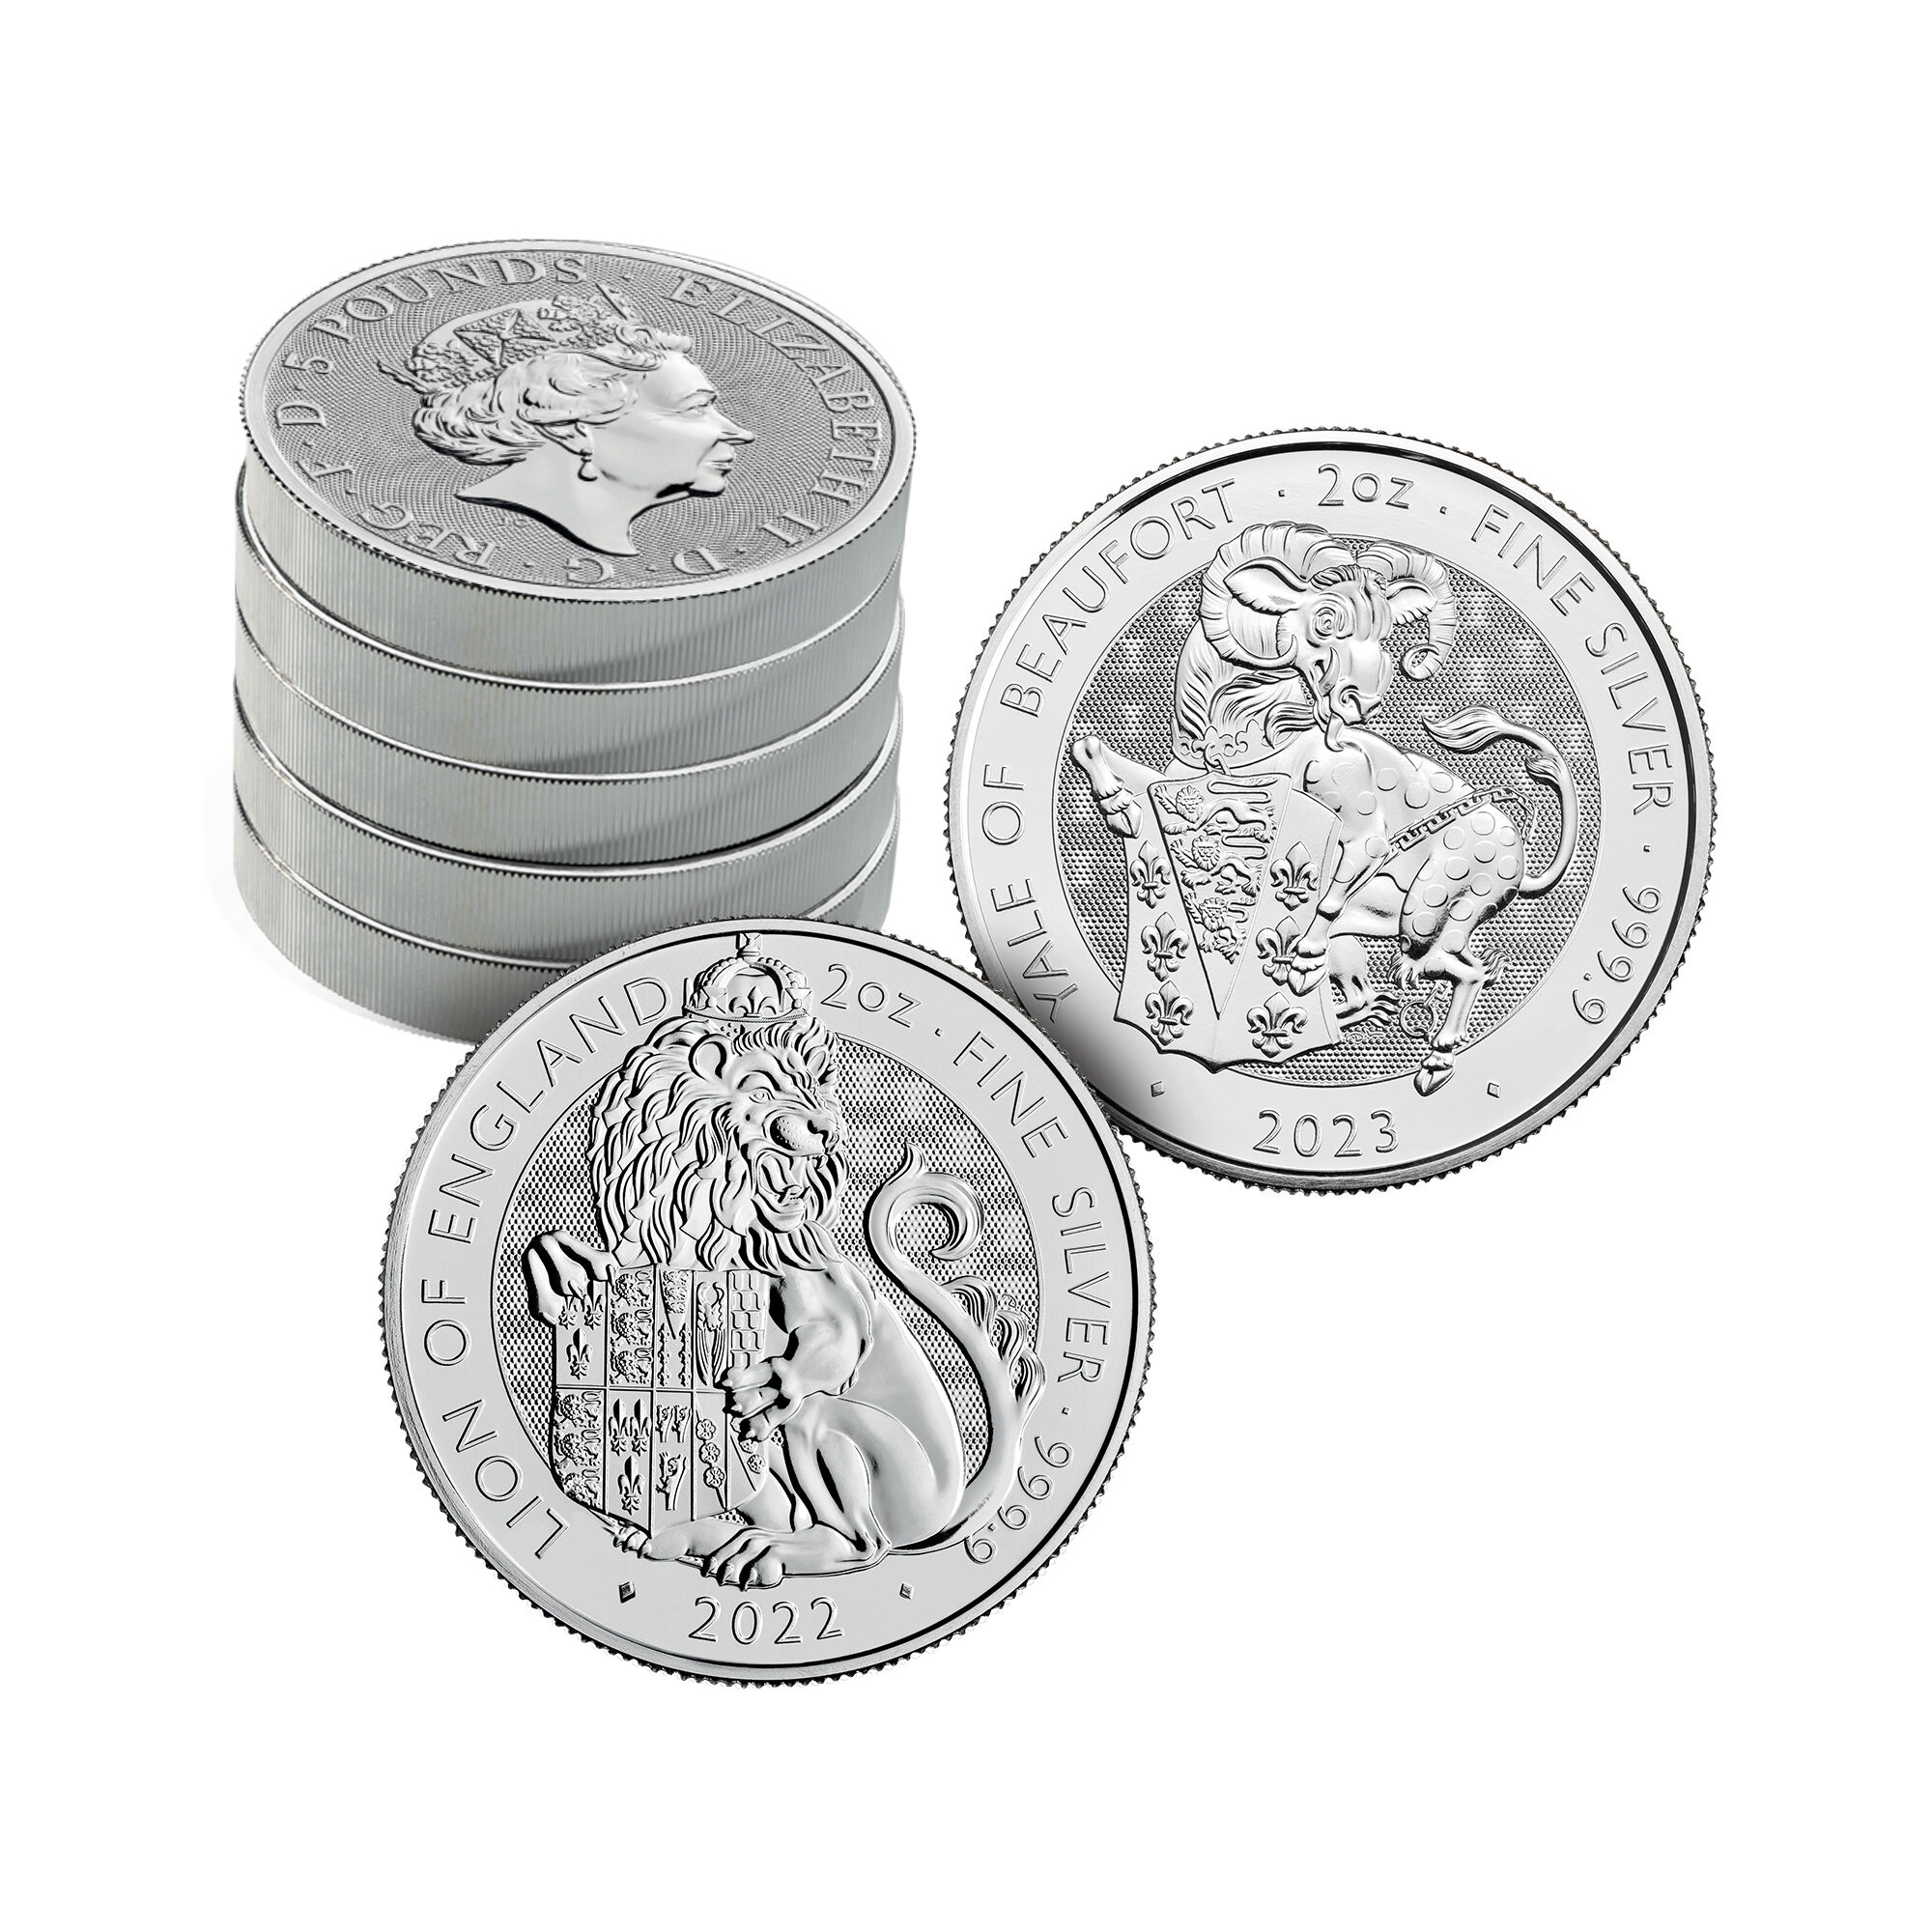 The Kings Beasts Silver Bullion Collection 10857 0011 c coins